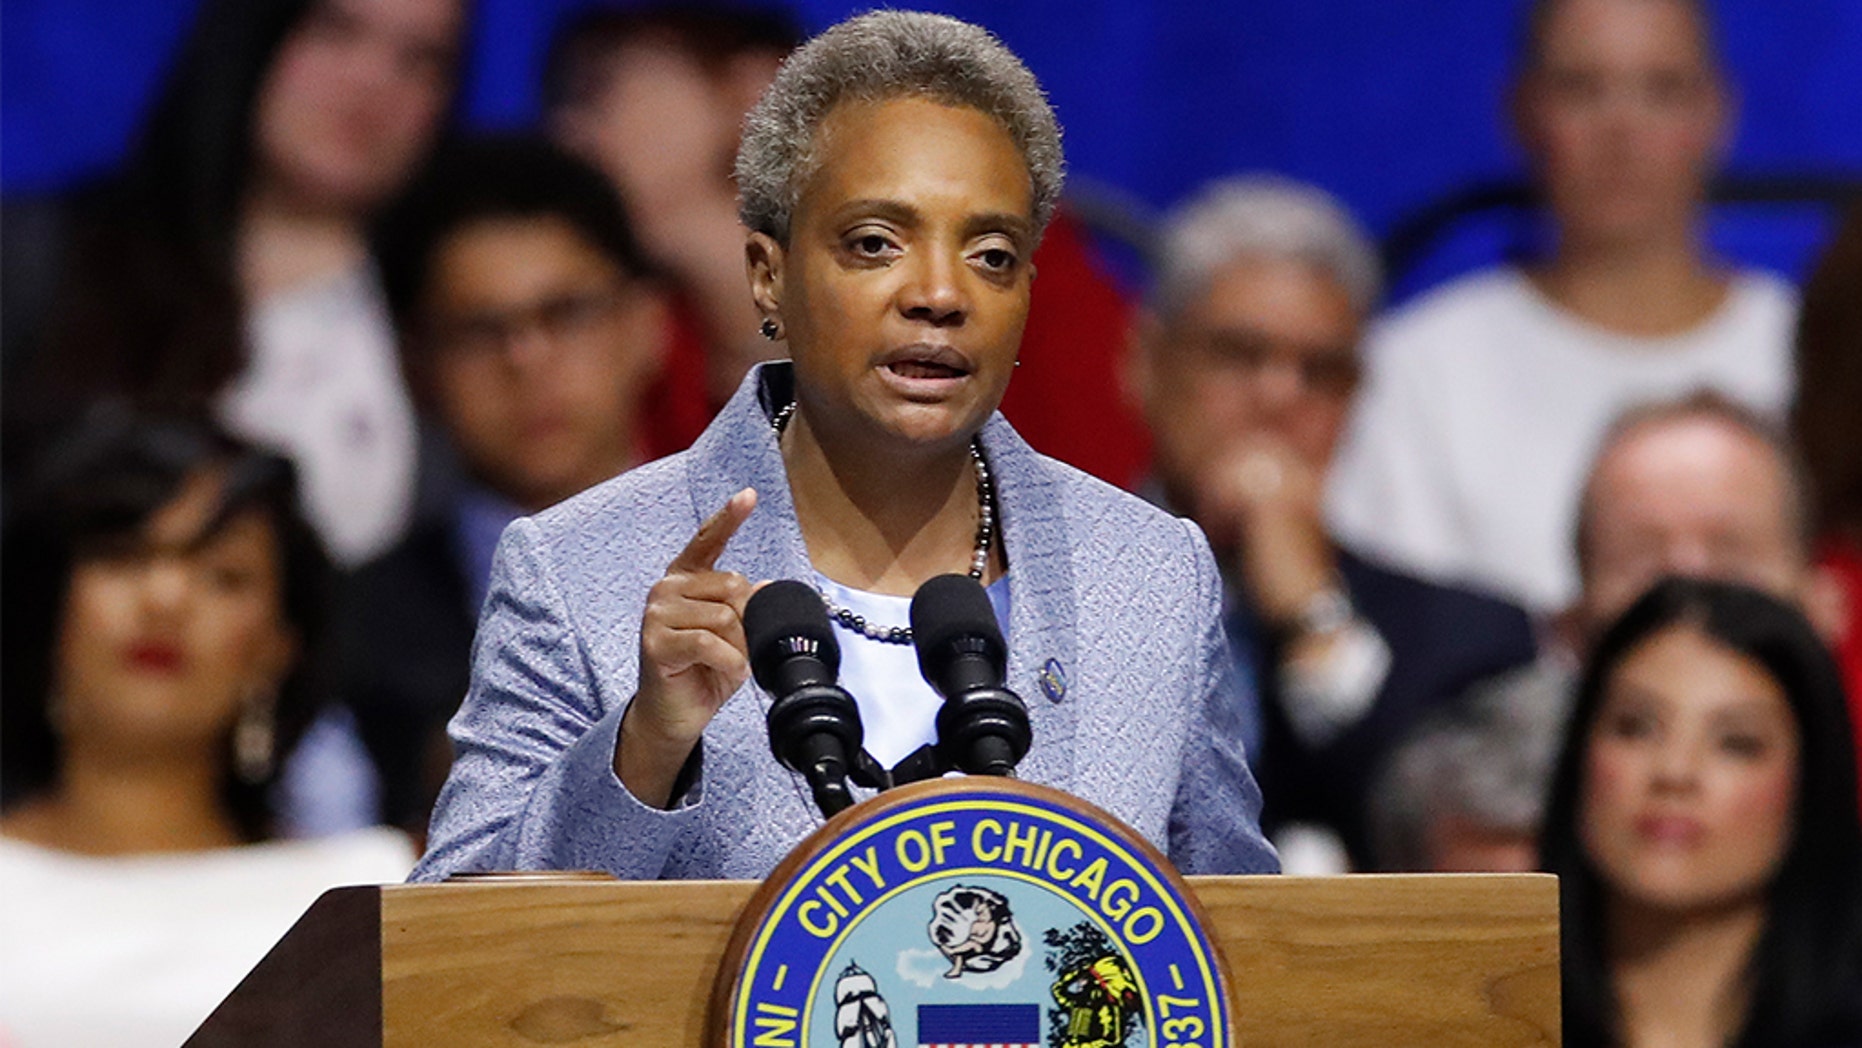 Mayor of Chicago, Lori Lightfoot, will speak at the inauguration ceremony on Monday, May 20, 2019 in Chicago. (AP Photo / Jim Young)